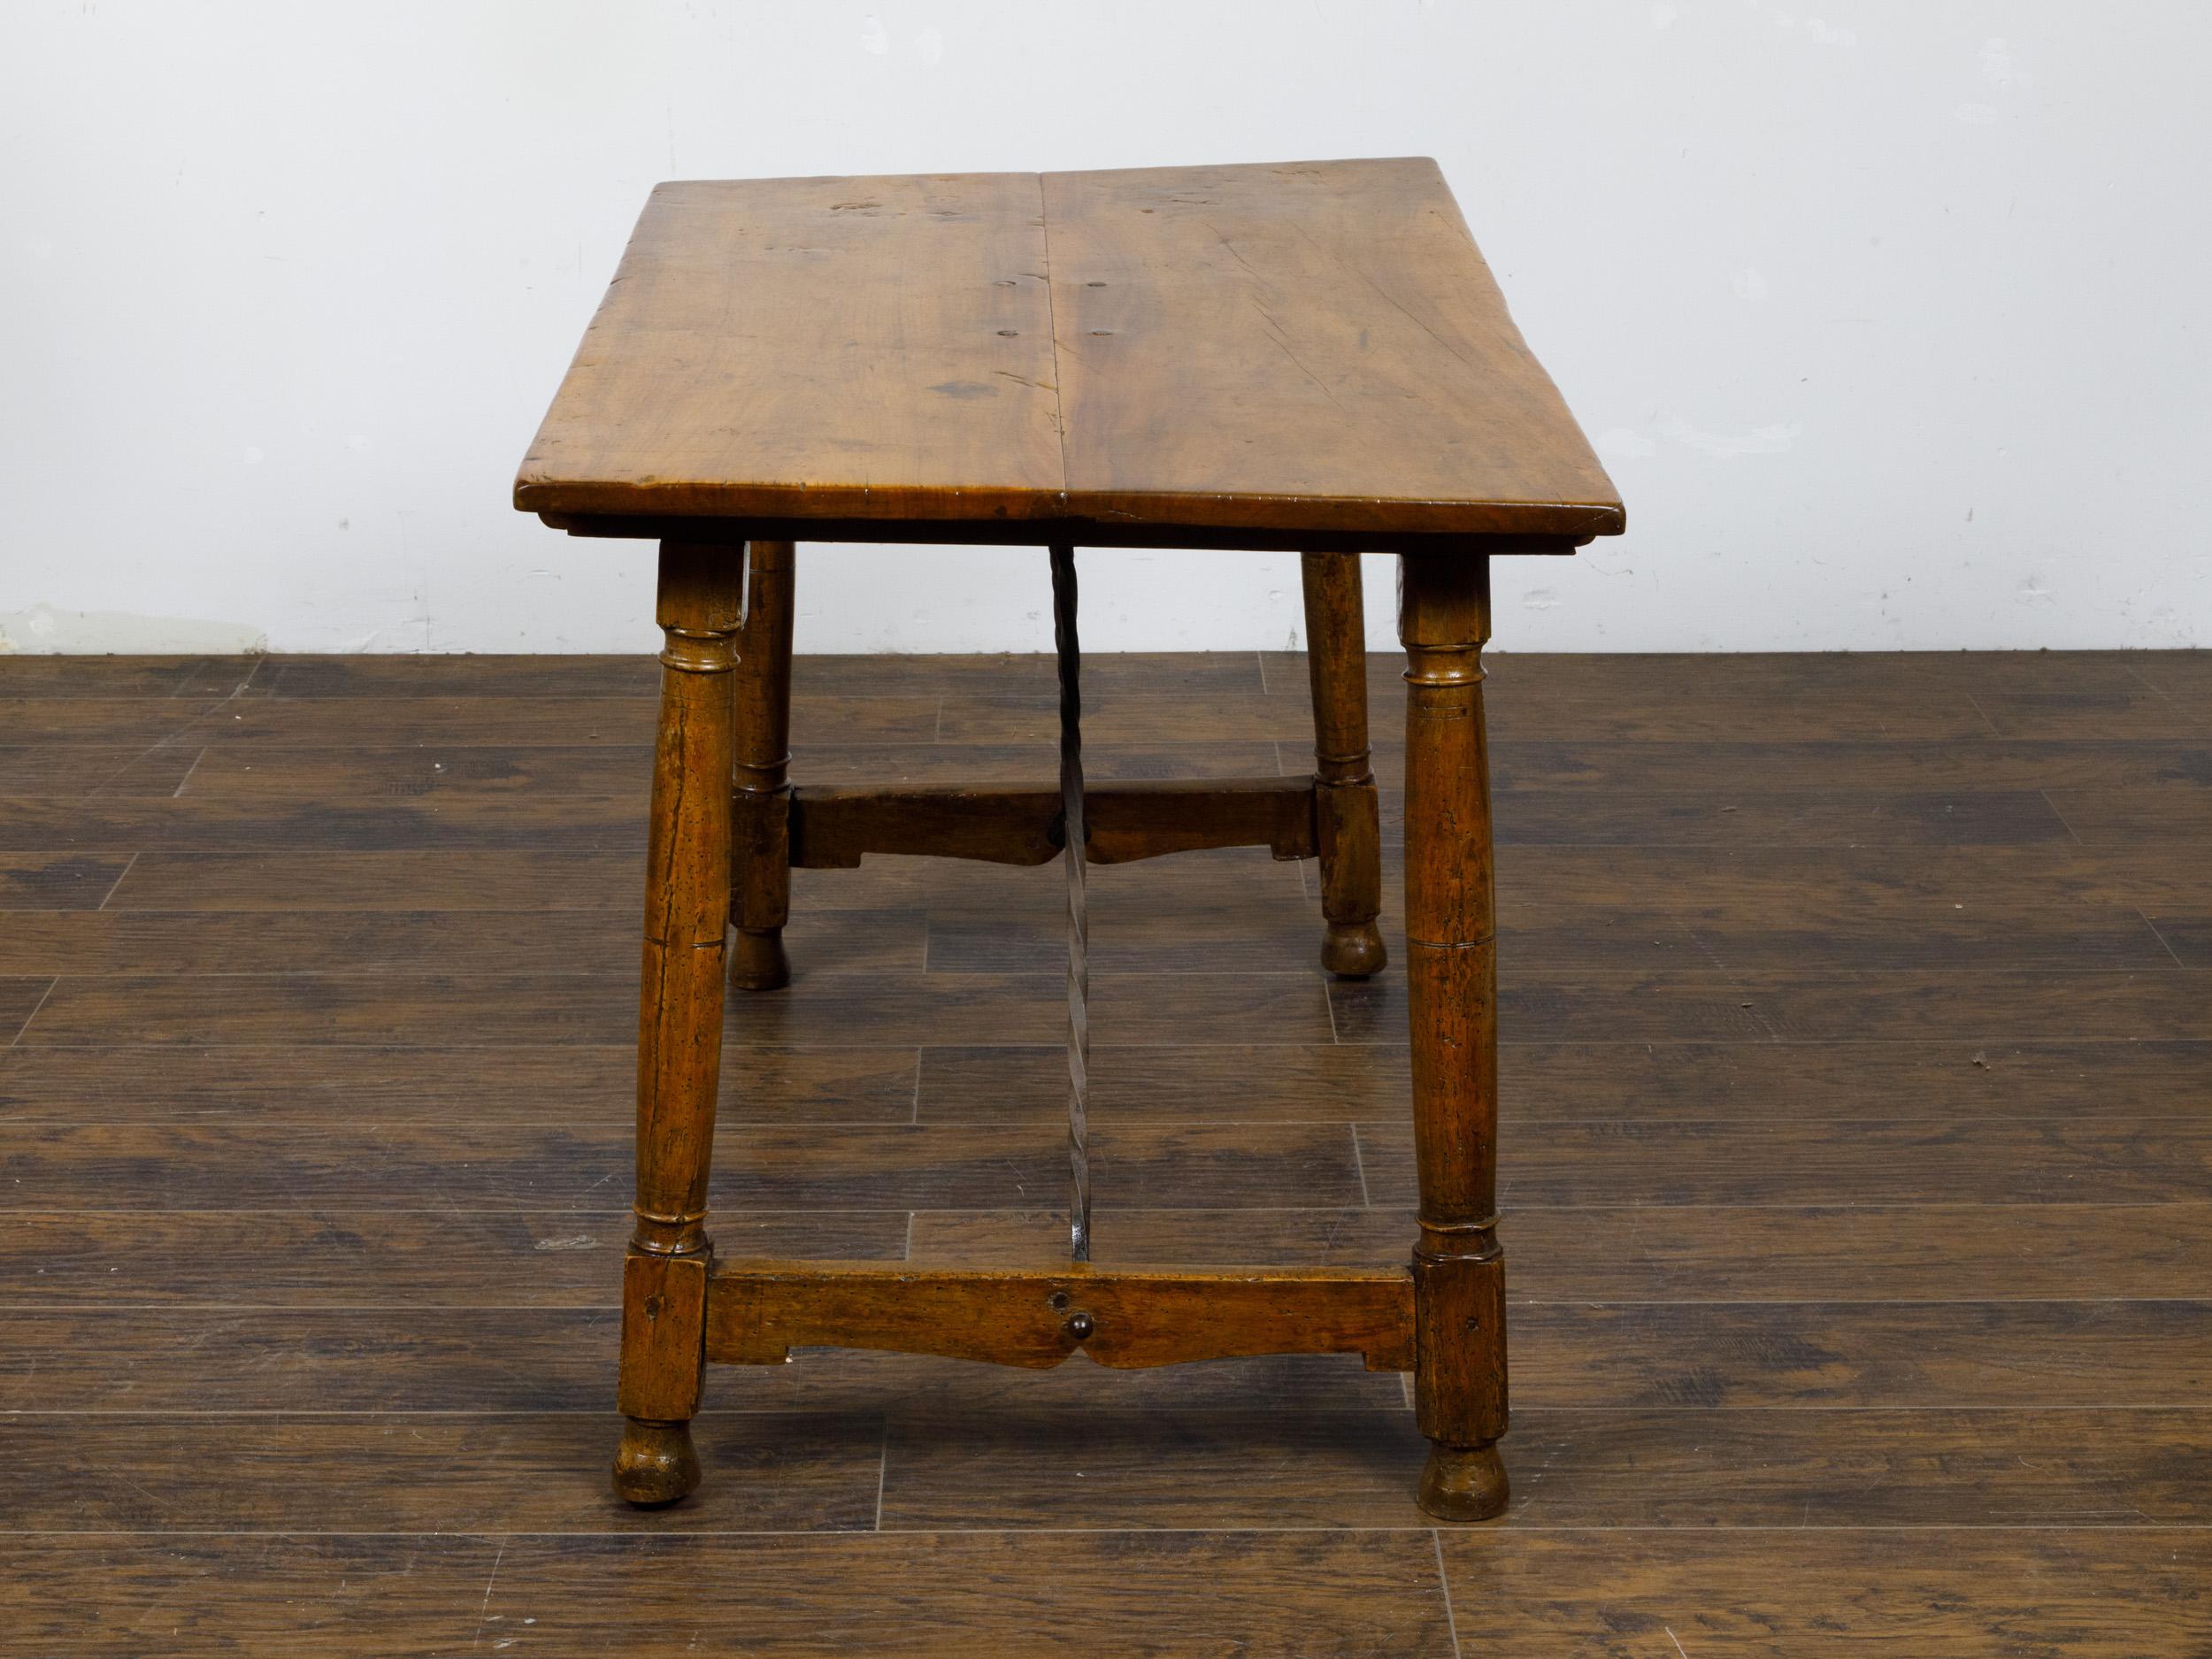 Italian 19th Century Walnut Console Table with Column Legs and Iron Stretchers For Sale 2